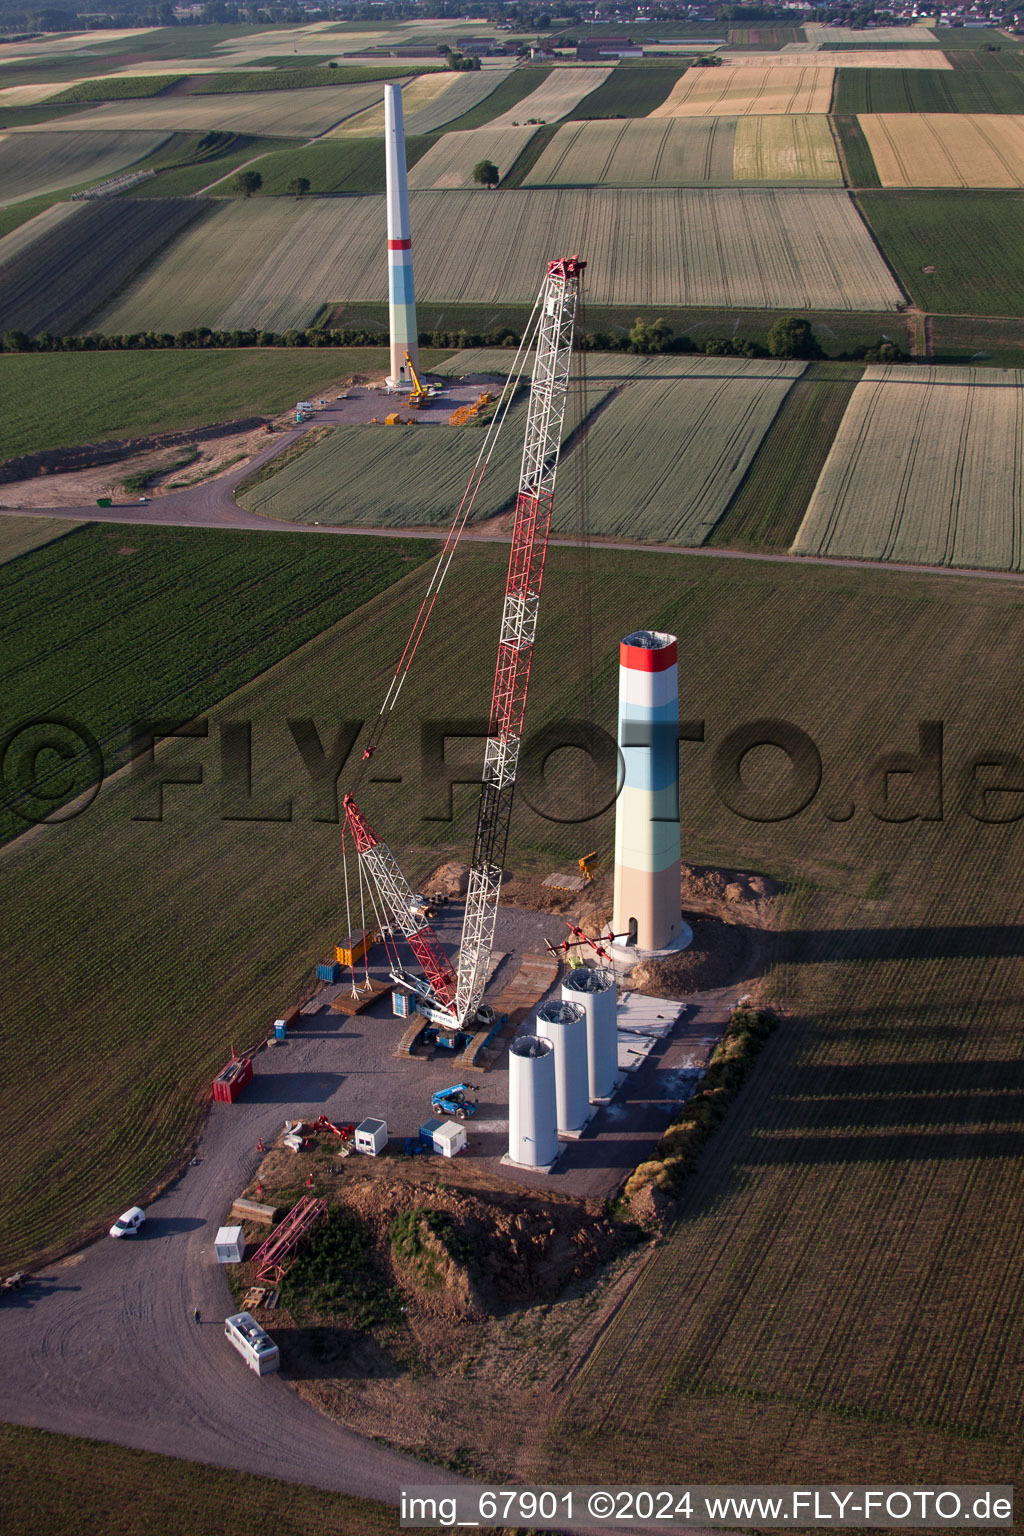 Aerial view of New wind farm in Offenbach an der Queich in the state Rhineland-Palatinate, Germany